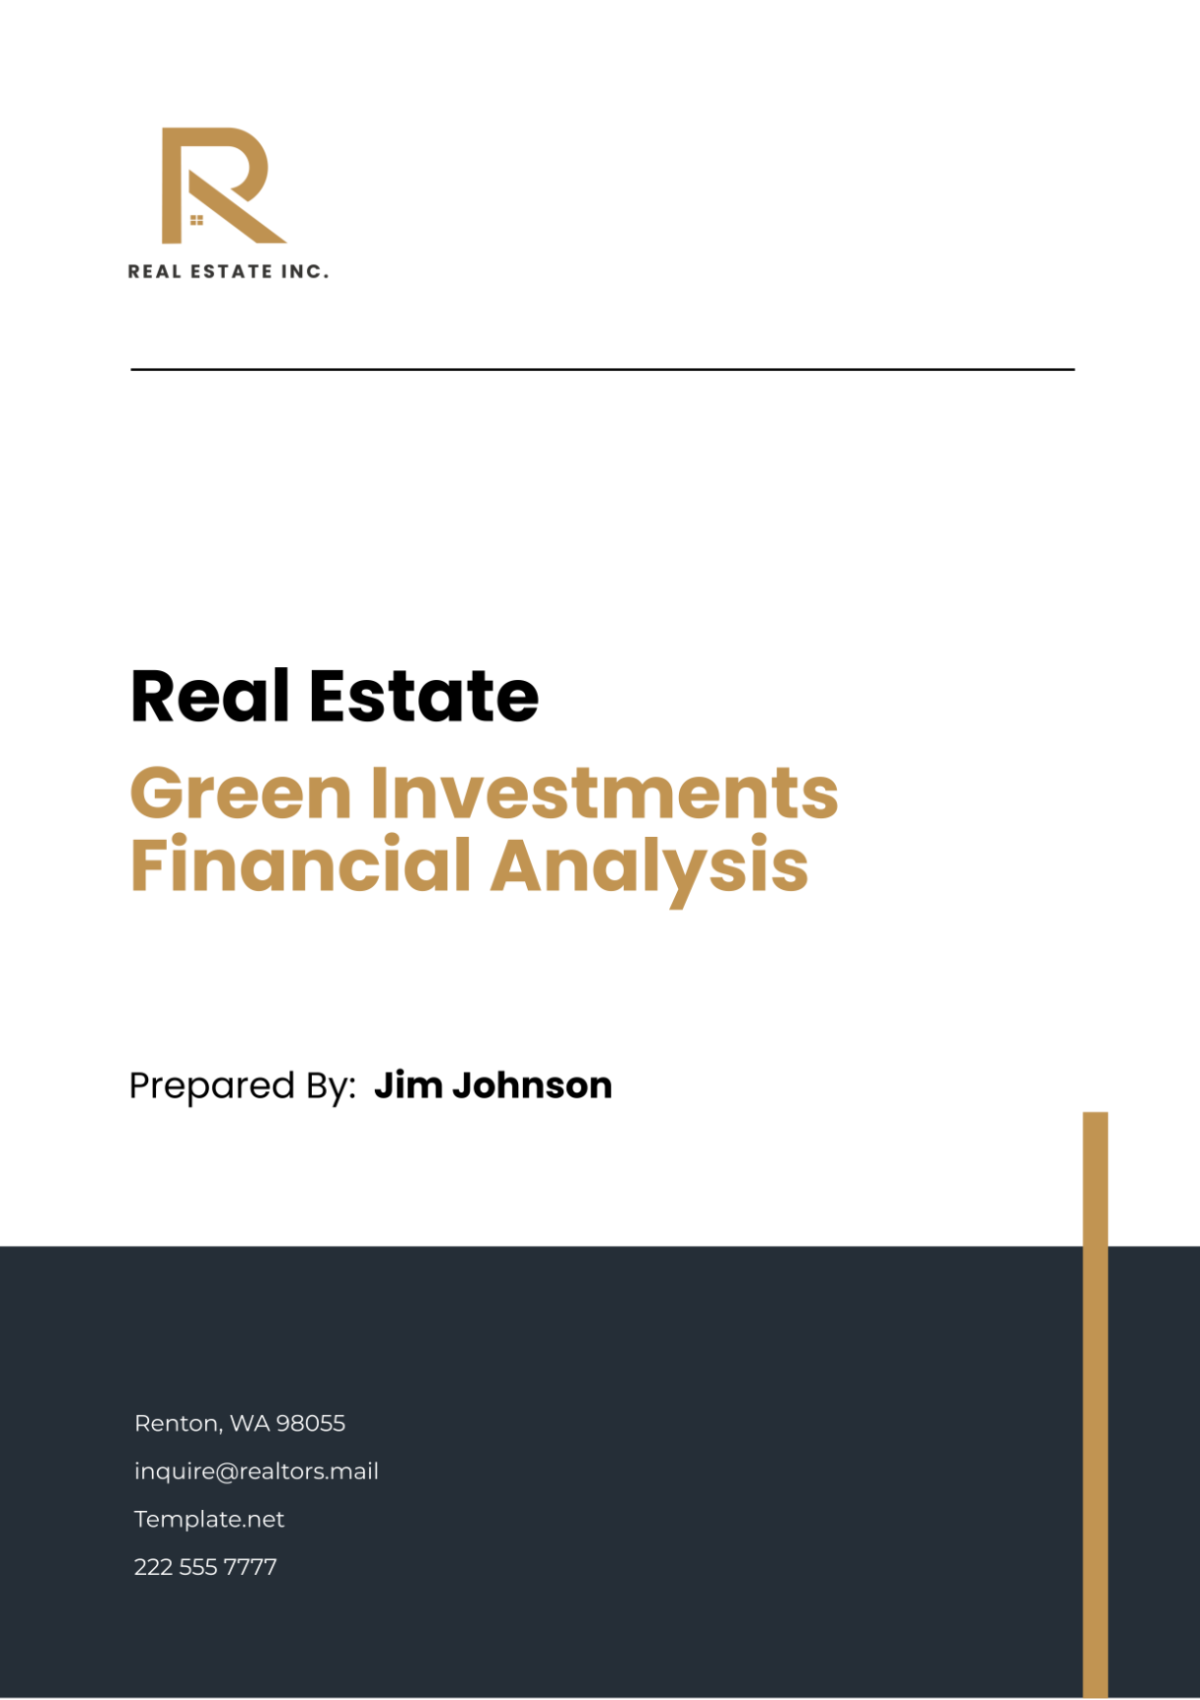 Real Estate Green Investments Financial Analysis Template